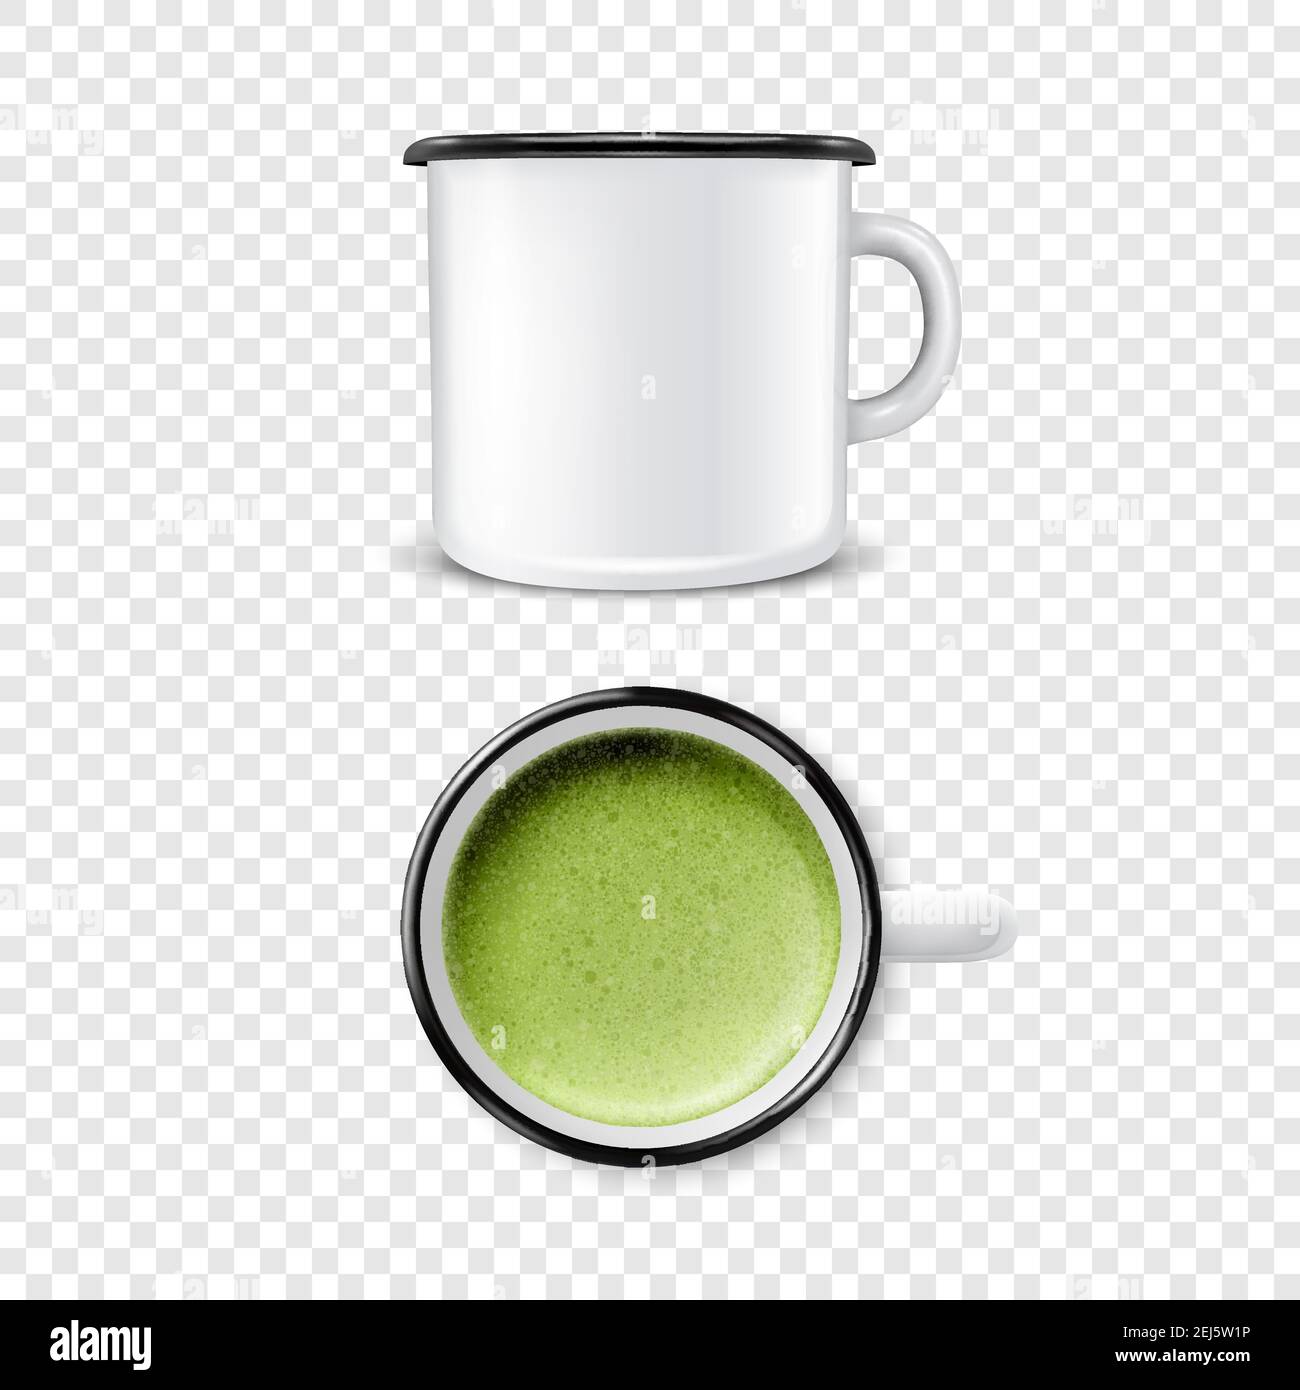 https://c8.alamy.com/comp/2EJ5W1P/vector-3d-realistic-enamel-metal-blank-white-mug-with-green-foam-milk-matcha-inside-isolated-on-transparent-background-front-and-top-view-design-2EJ5W1P.jpg